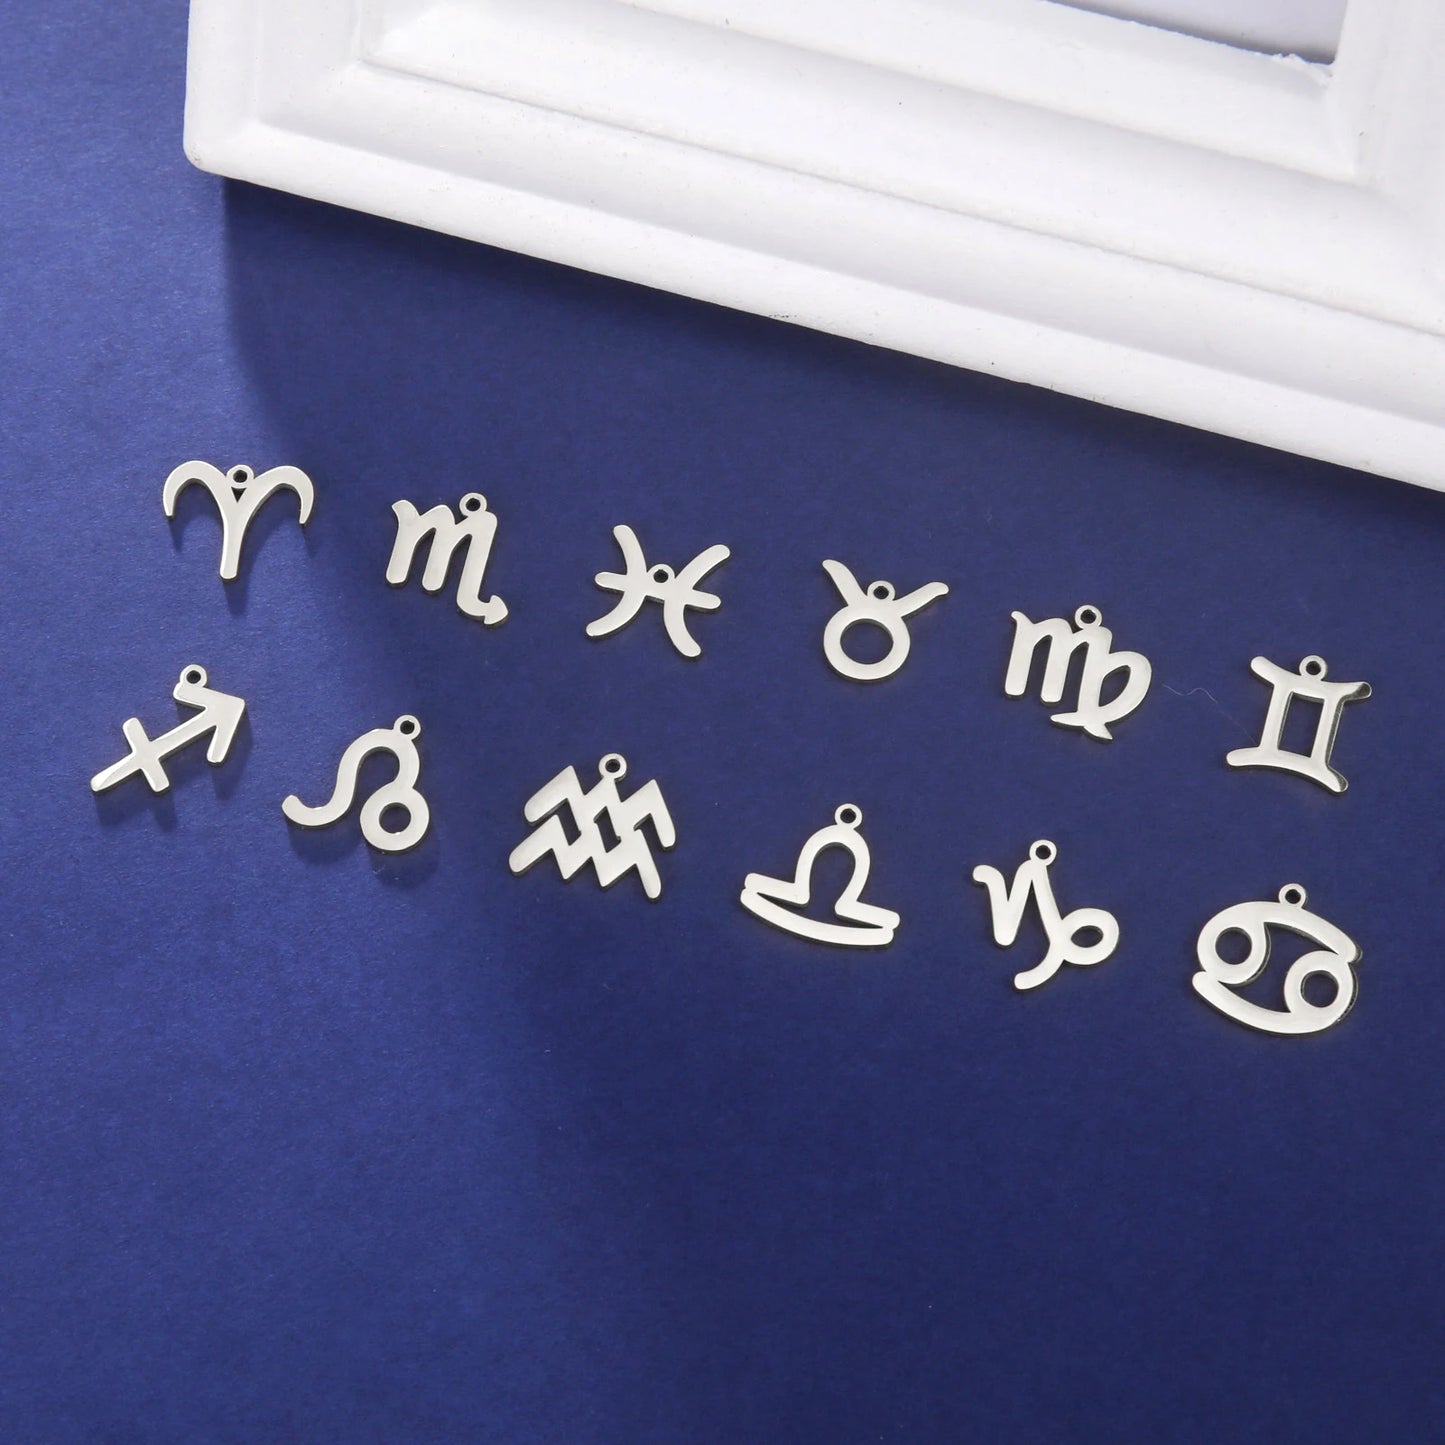 Skyrim 12pcs/lot Stainless Steel Zodiac Charms Horoscope Astrological Sign DIY Pendant for Necklace Bracelet Jewelry Making